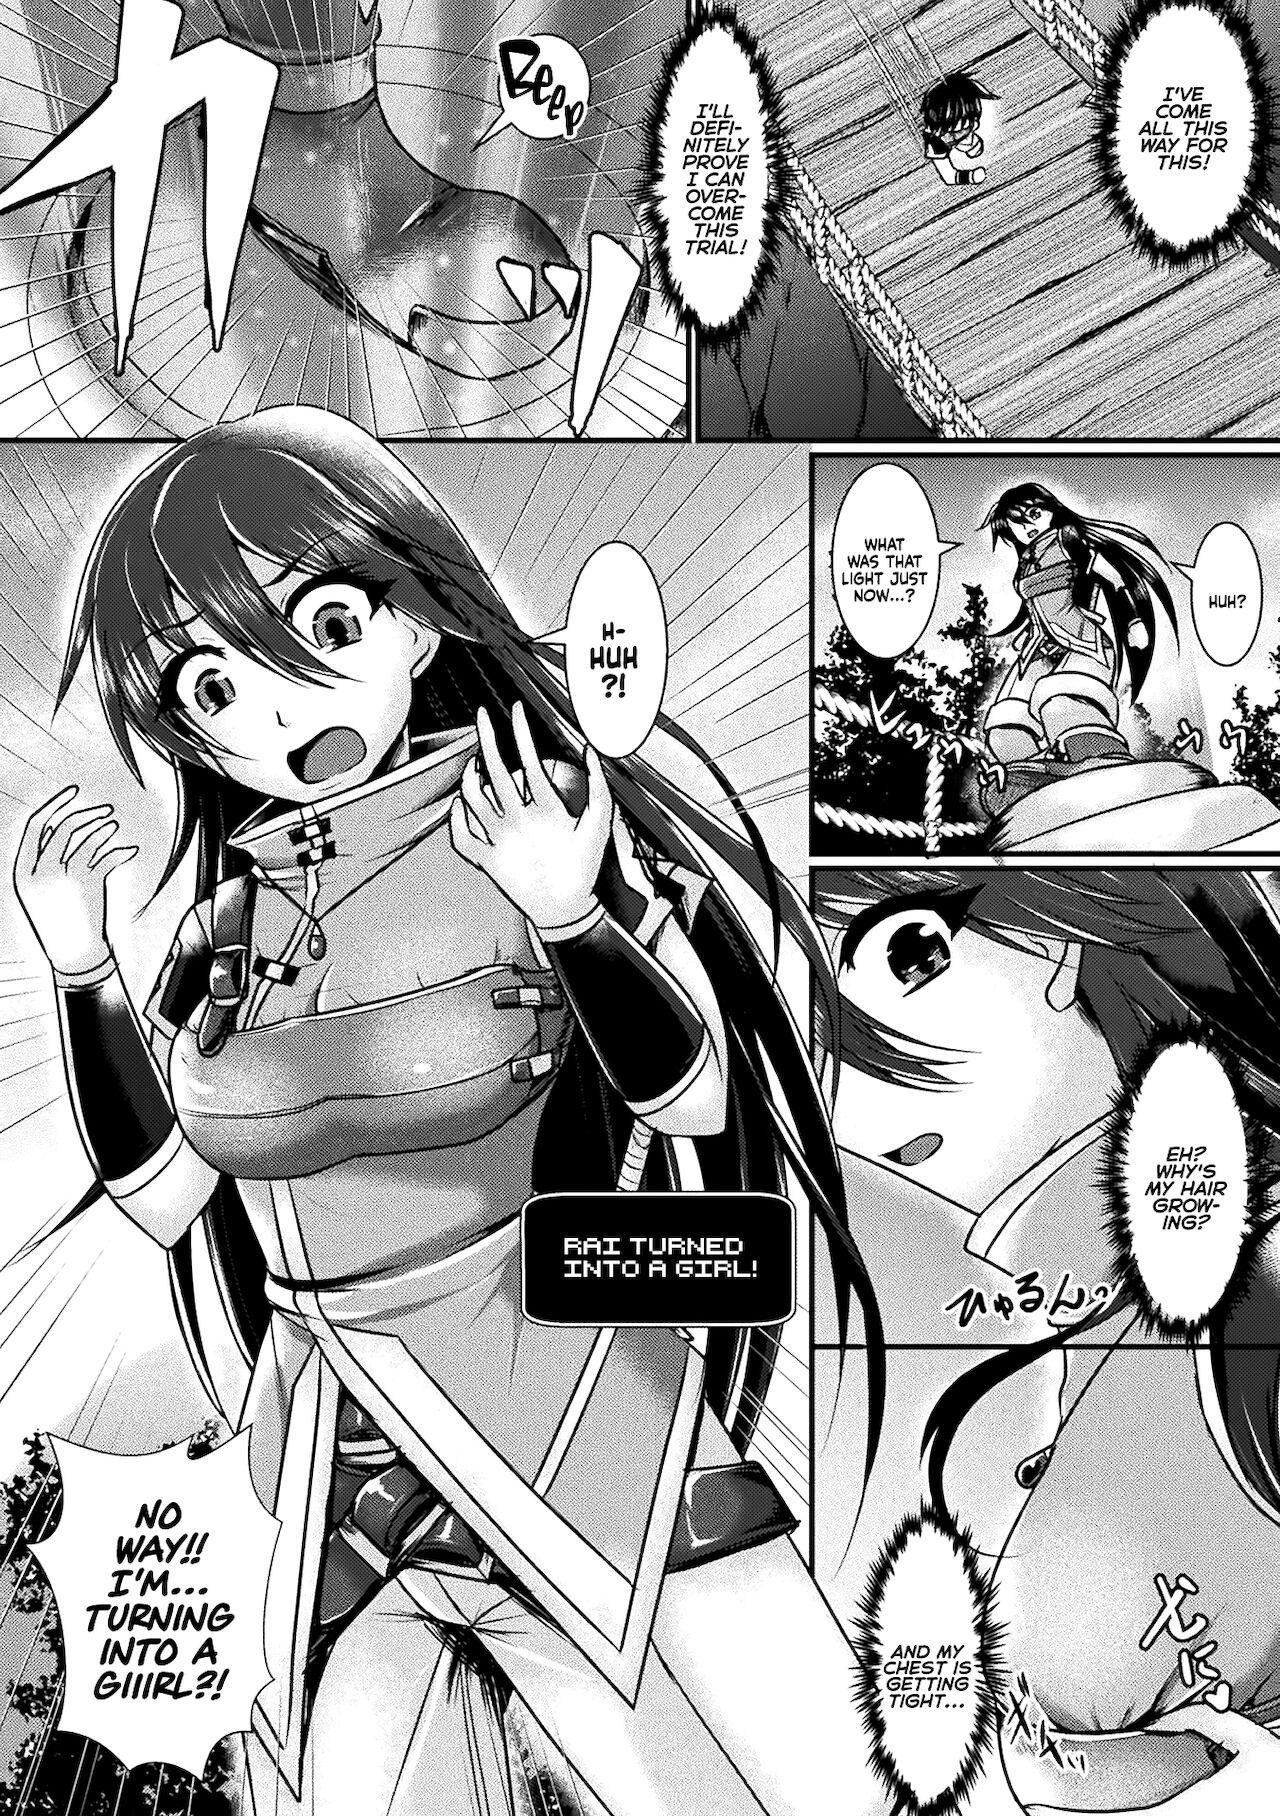 Best Blowjob The Final Trial - Ero trap dungeon Blondes - Page 2